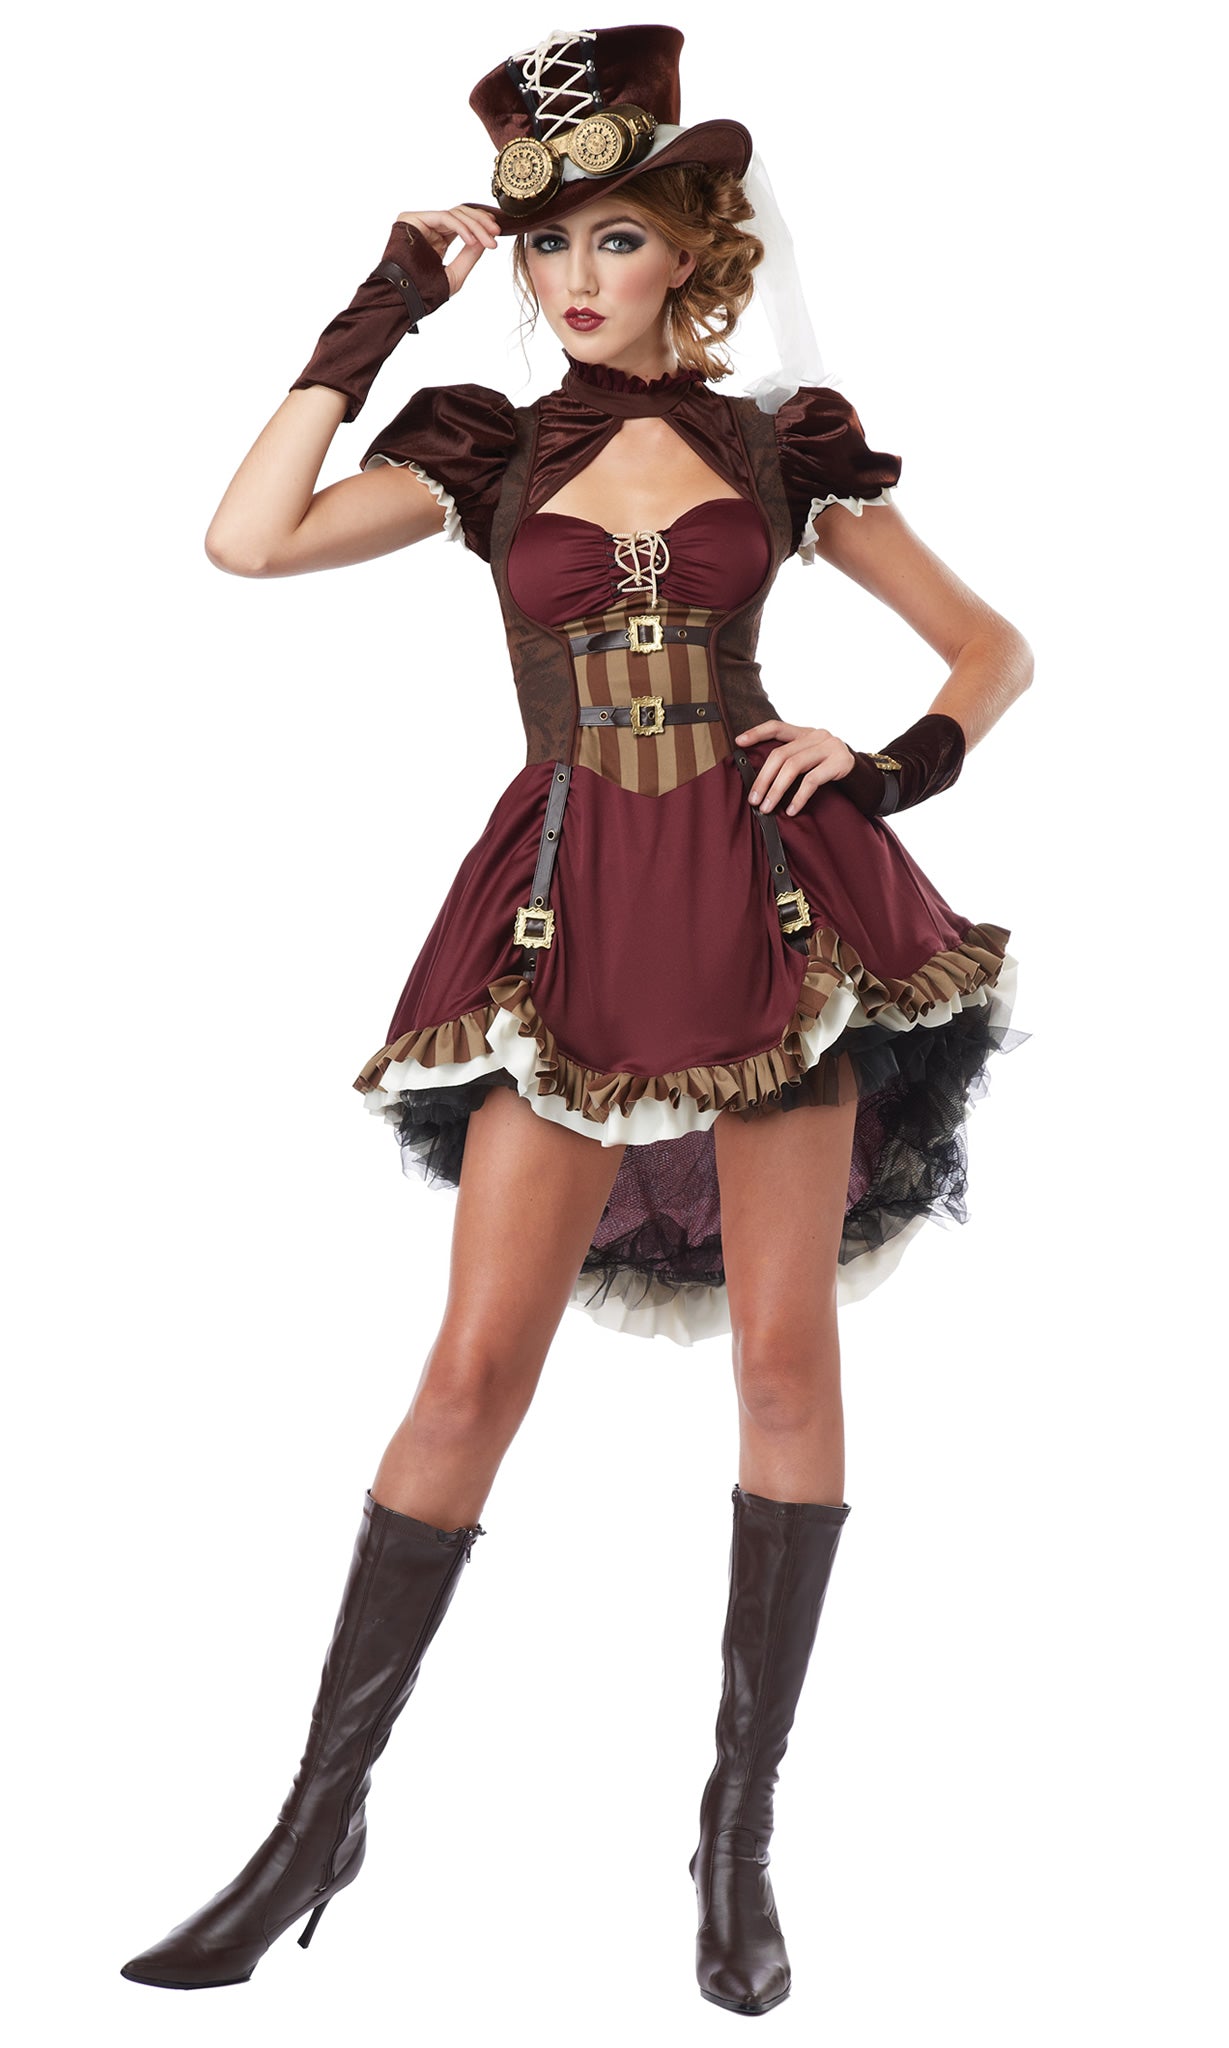 Alternate view of steampunk woman's dress with hat, goggles and gloves